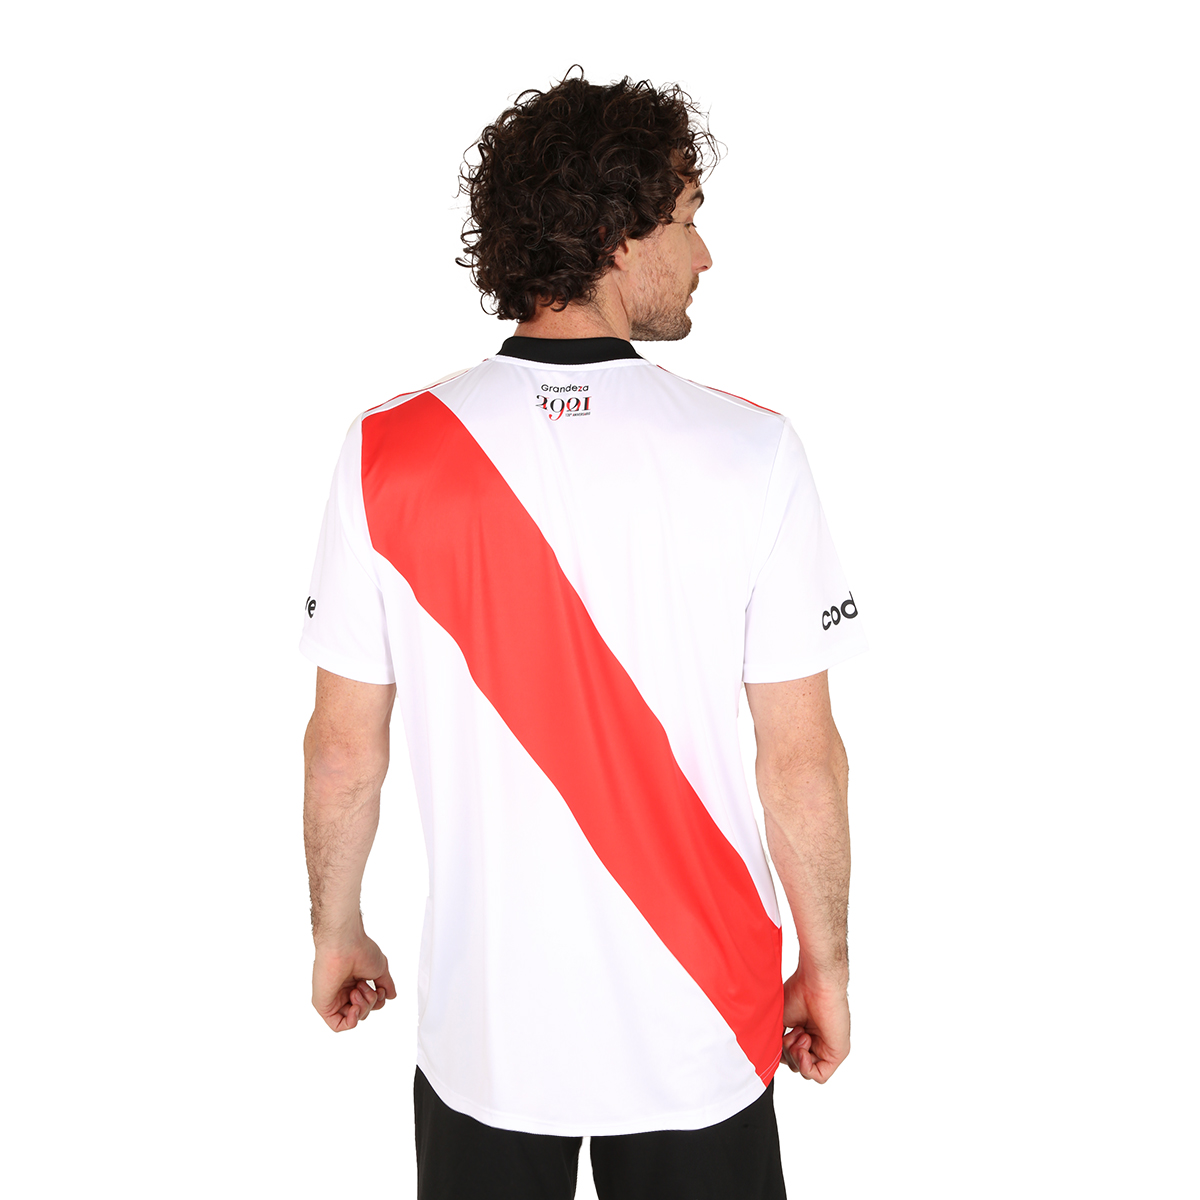 Camiseta adidas Local River Plate 21/22,  image number null